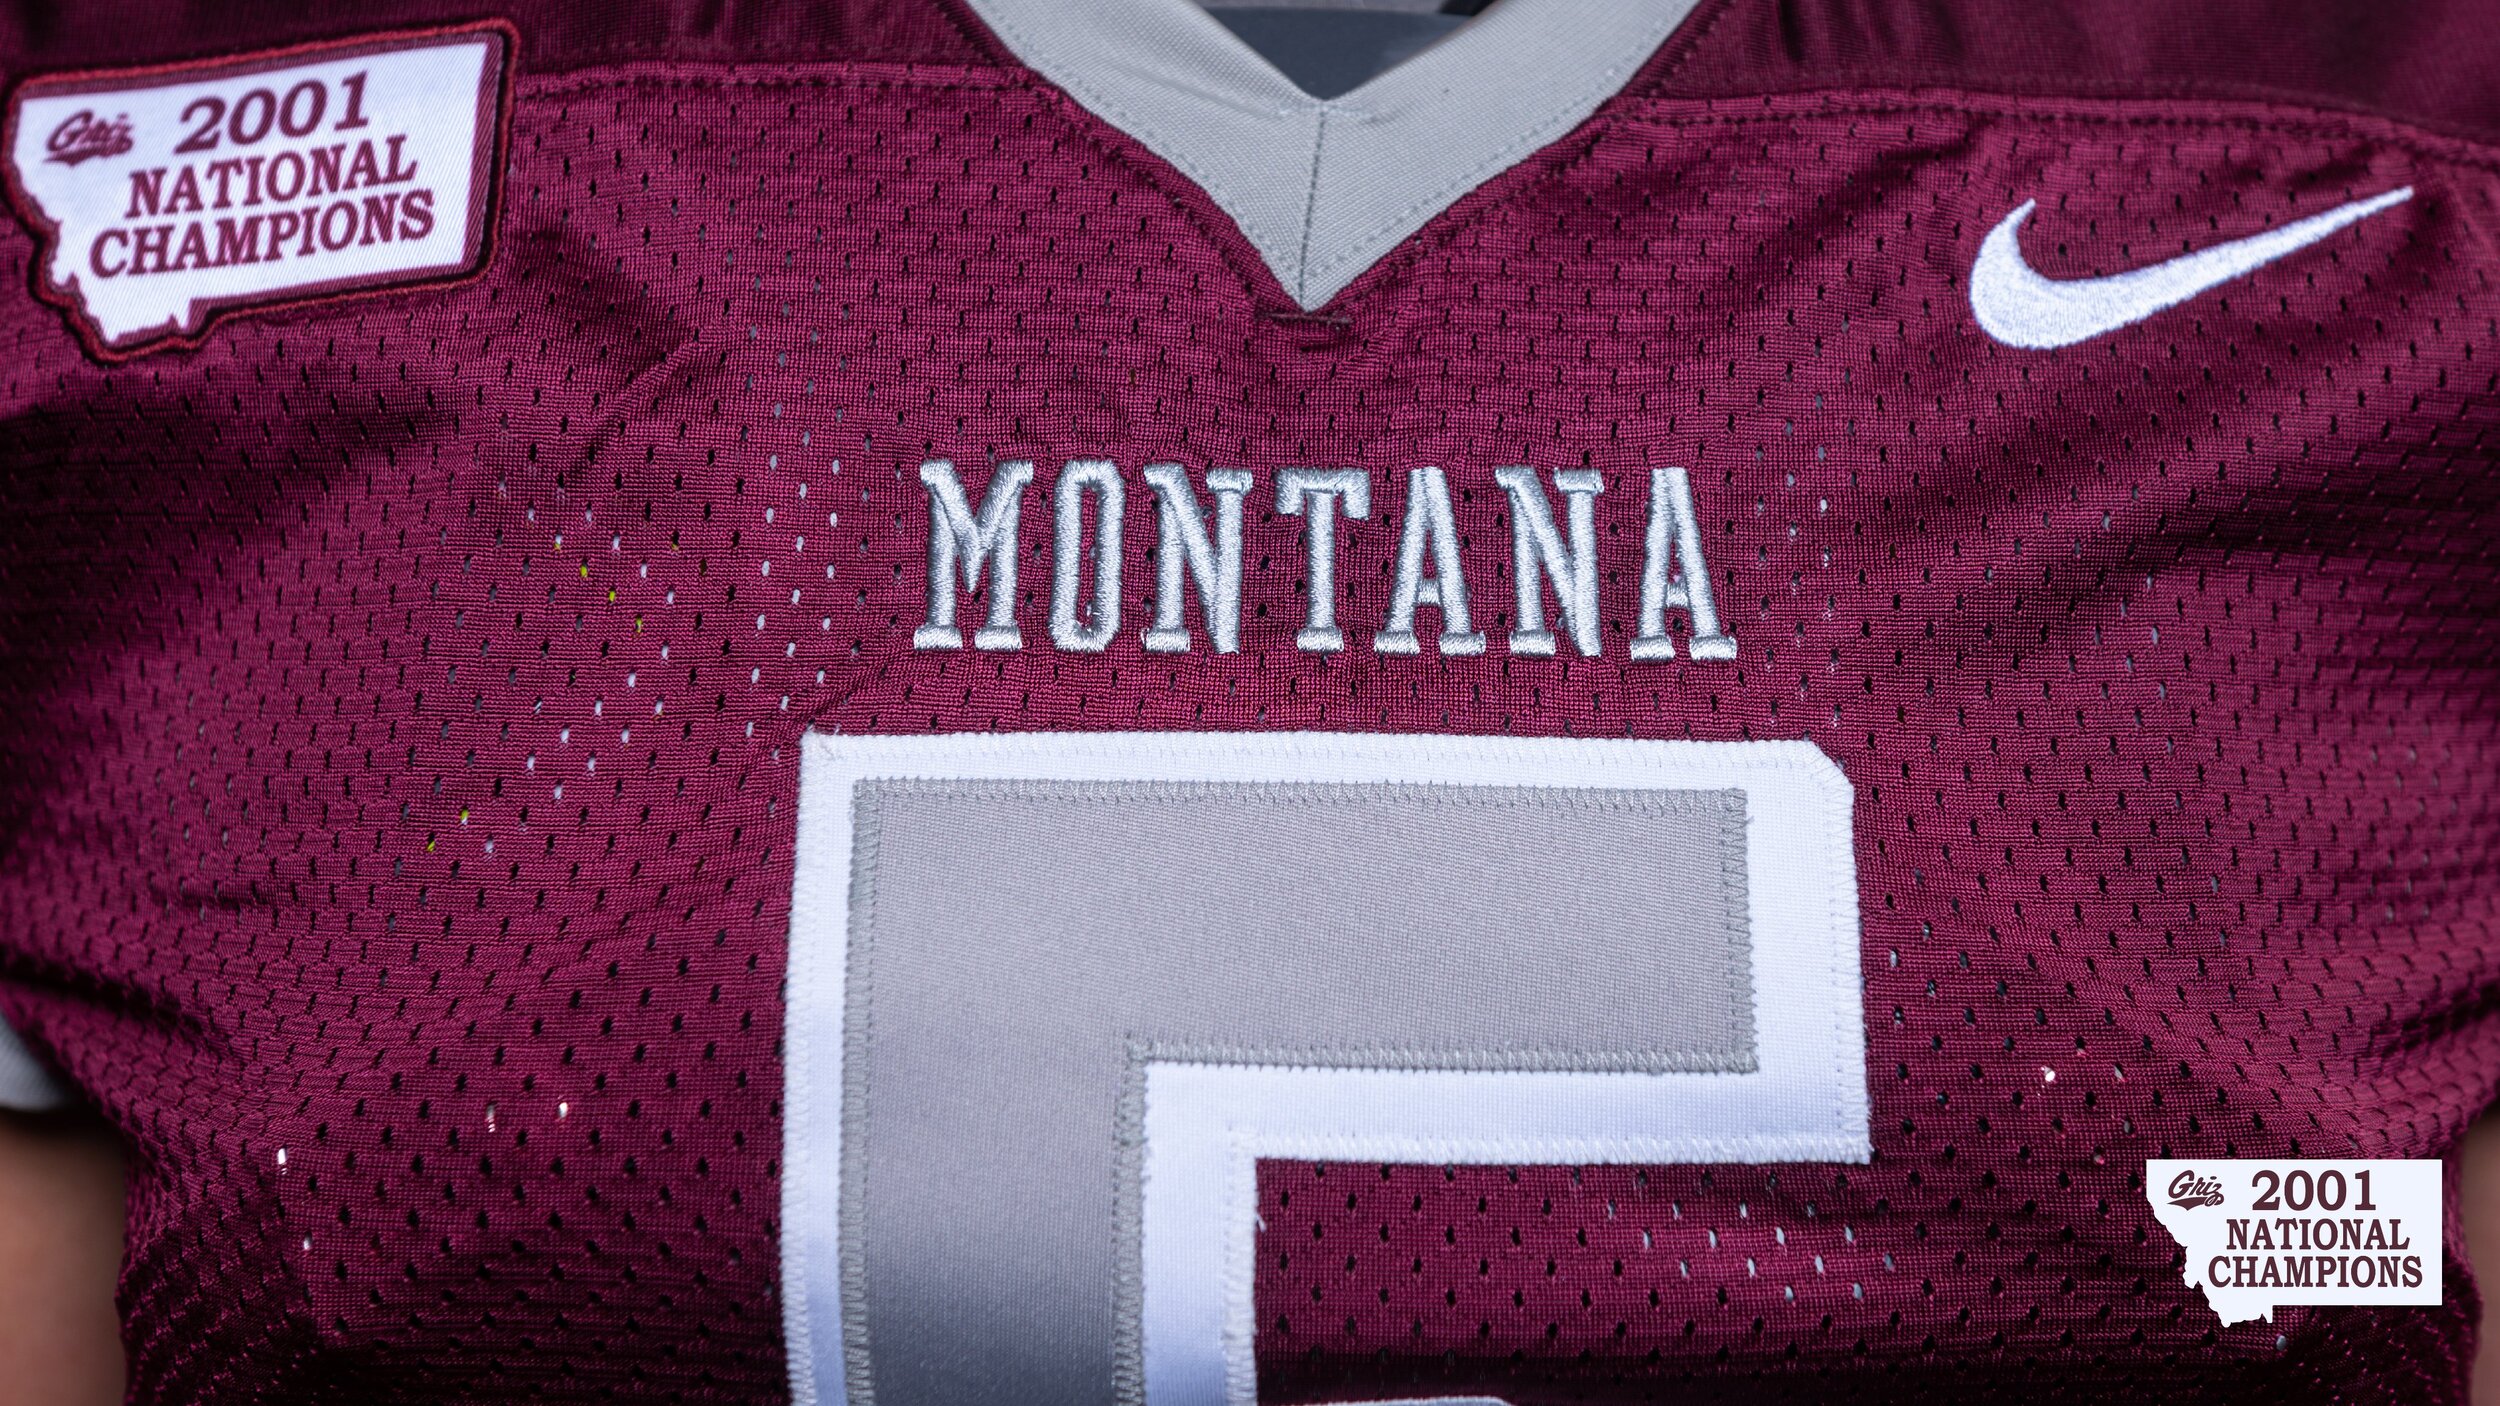 Own a piece of Griz history – buy a Montana granite game jersey